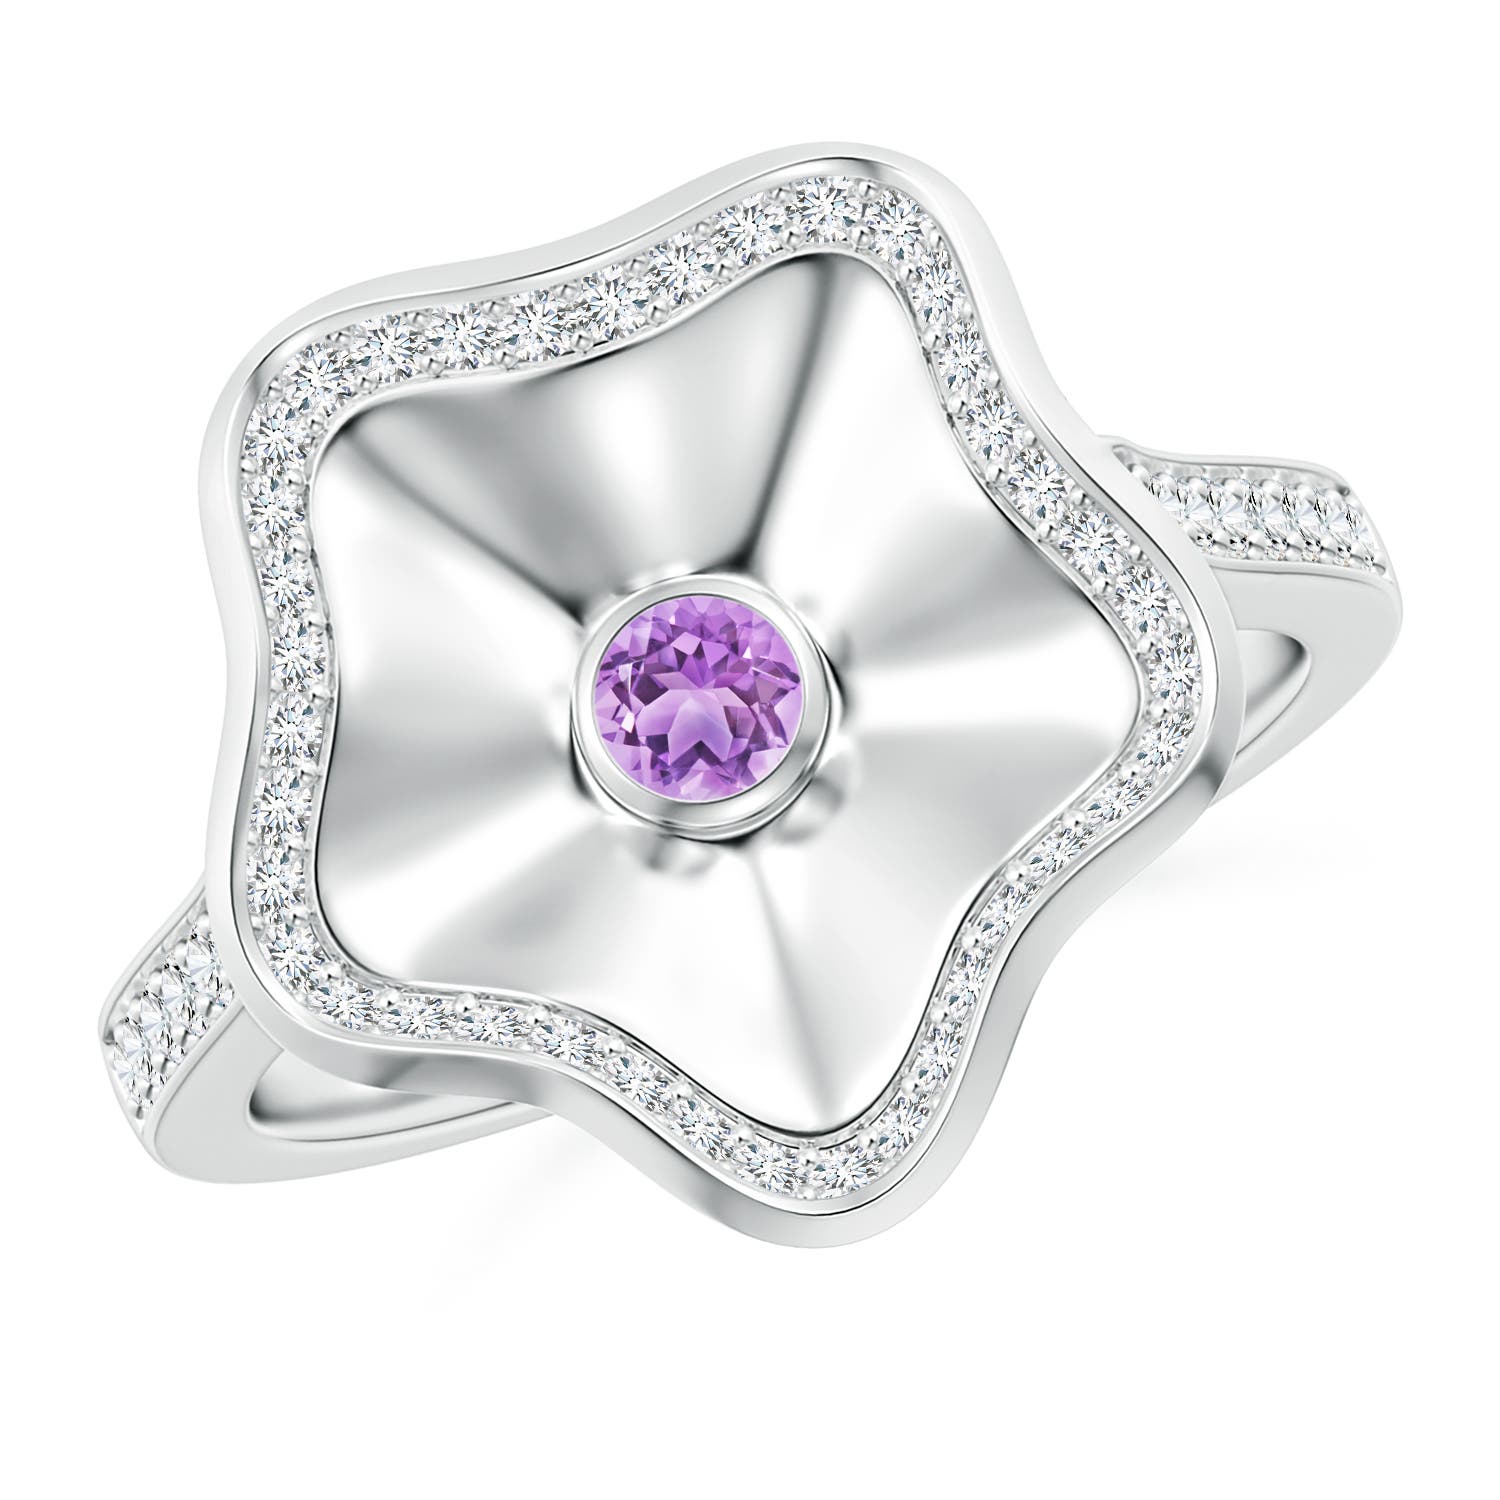 AAA - Amethyst / 0.47 CT / 14 KT White Gold